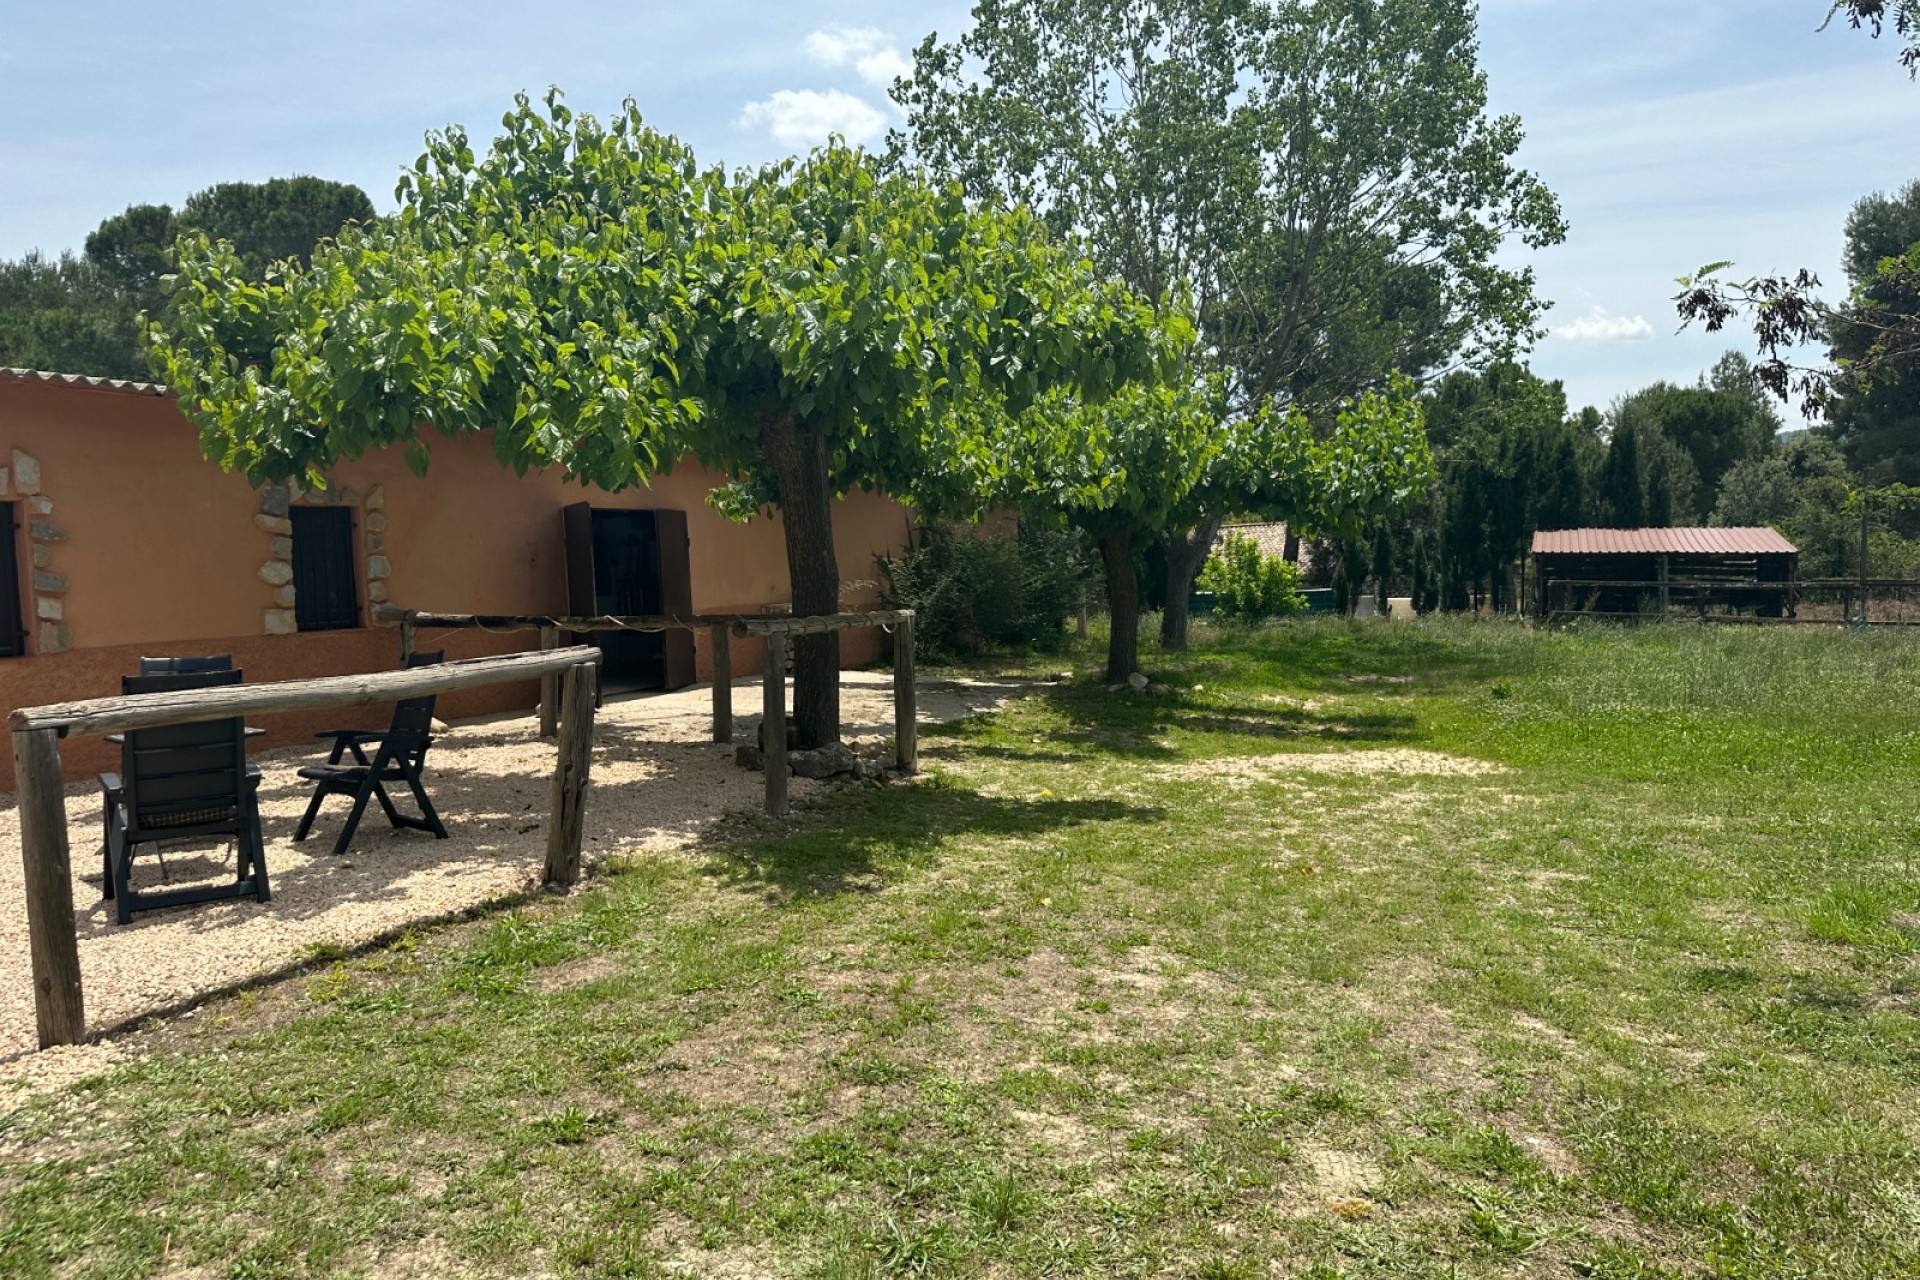 Revente - Country House -
Bocairent - Inland